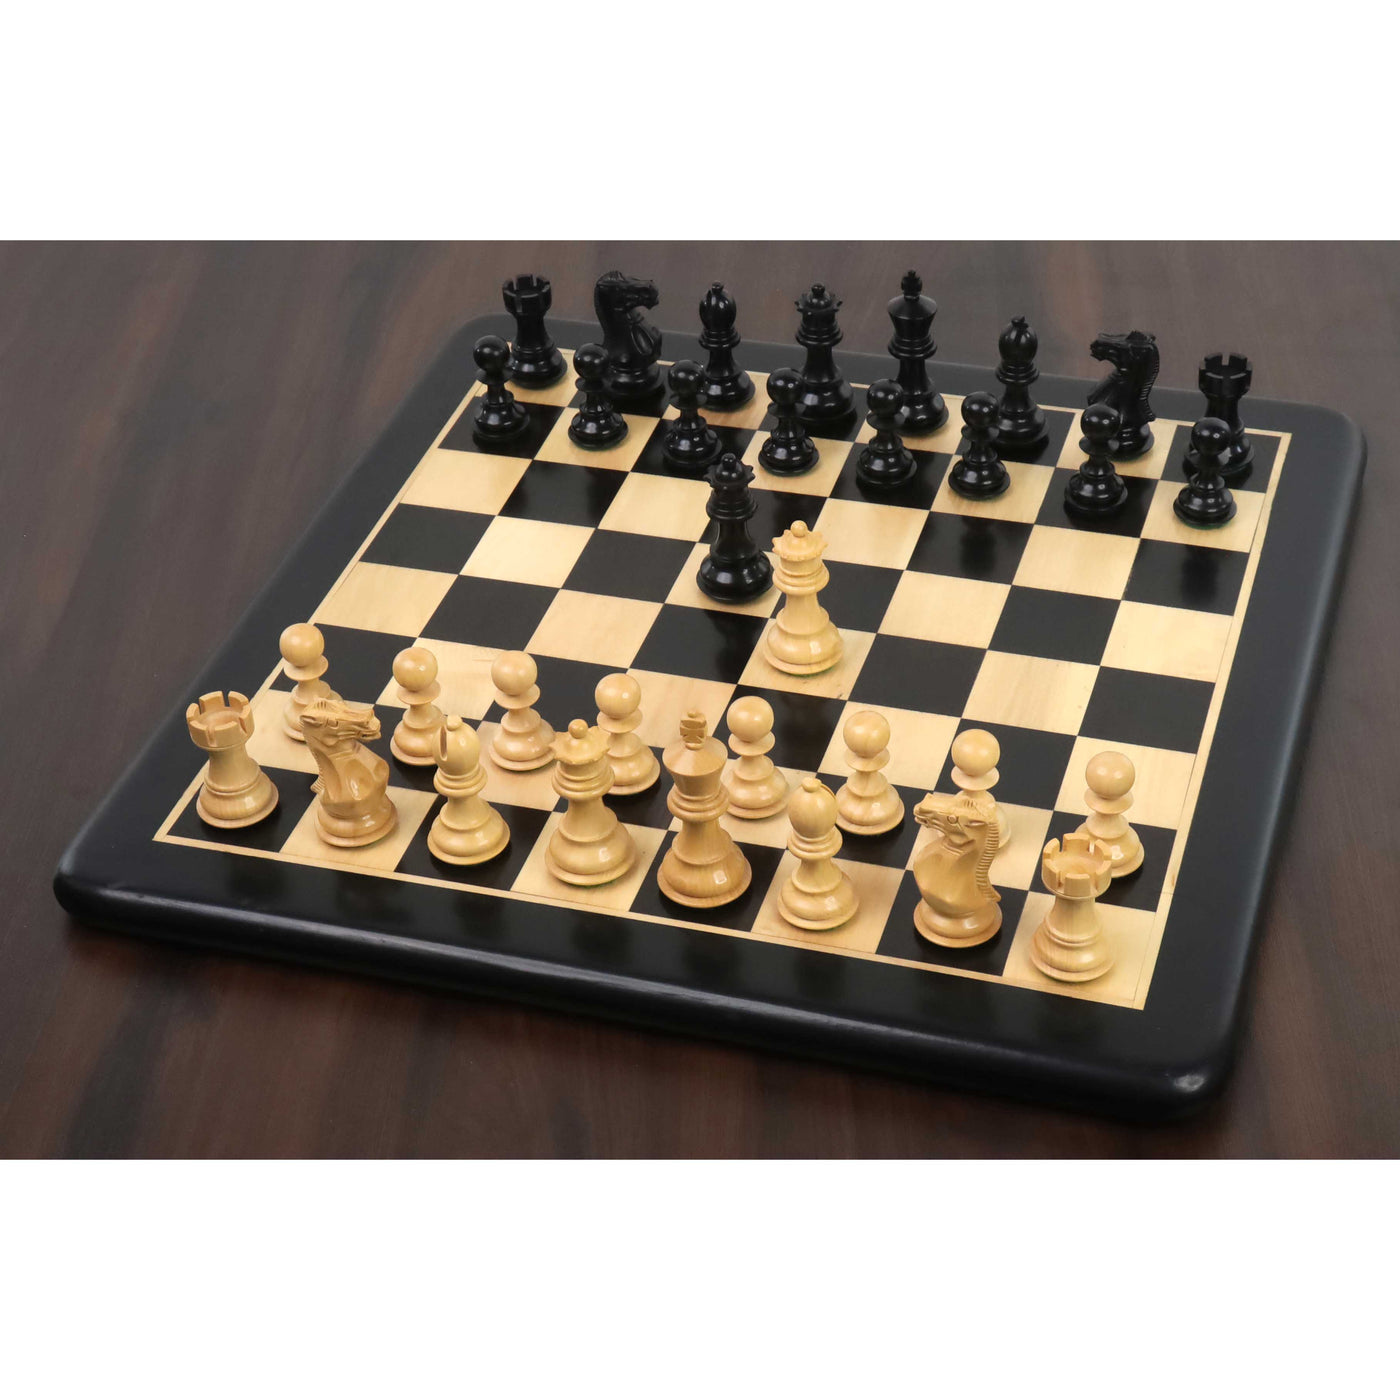 3.1" Pro Staunton Luxury Chess Pieces Only set - Triple Weighted Ebony Wood